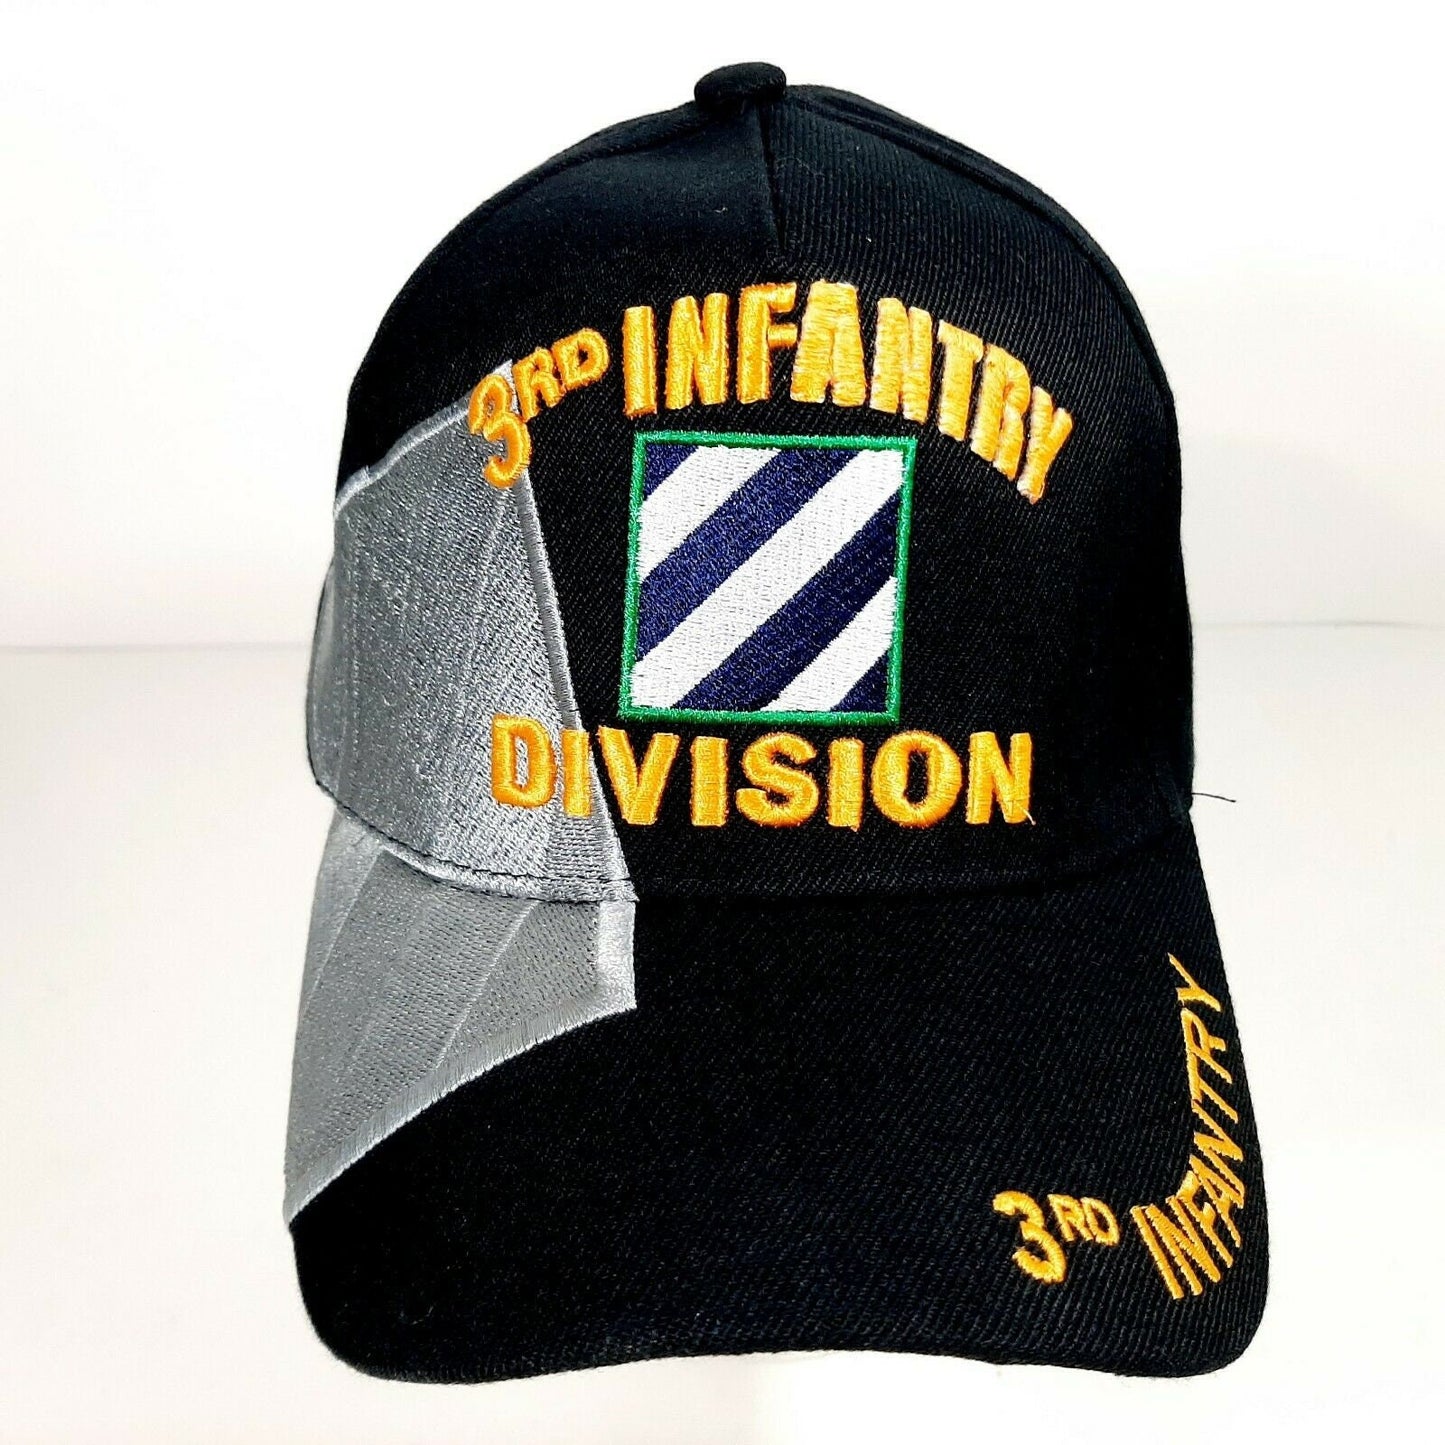 US Army 3rd Infantry Division Men's Ball Cap Hat Black Embroidered Acrylic